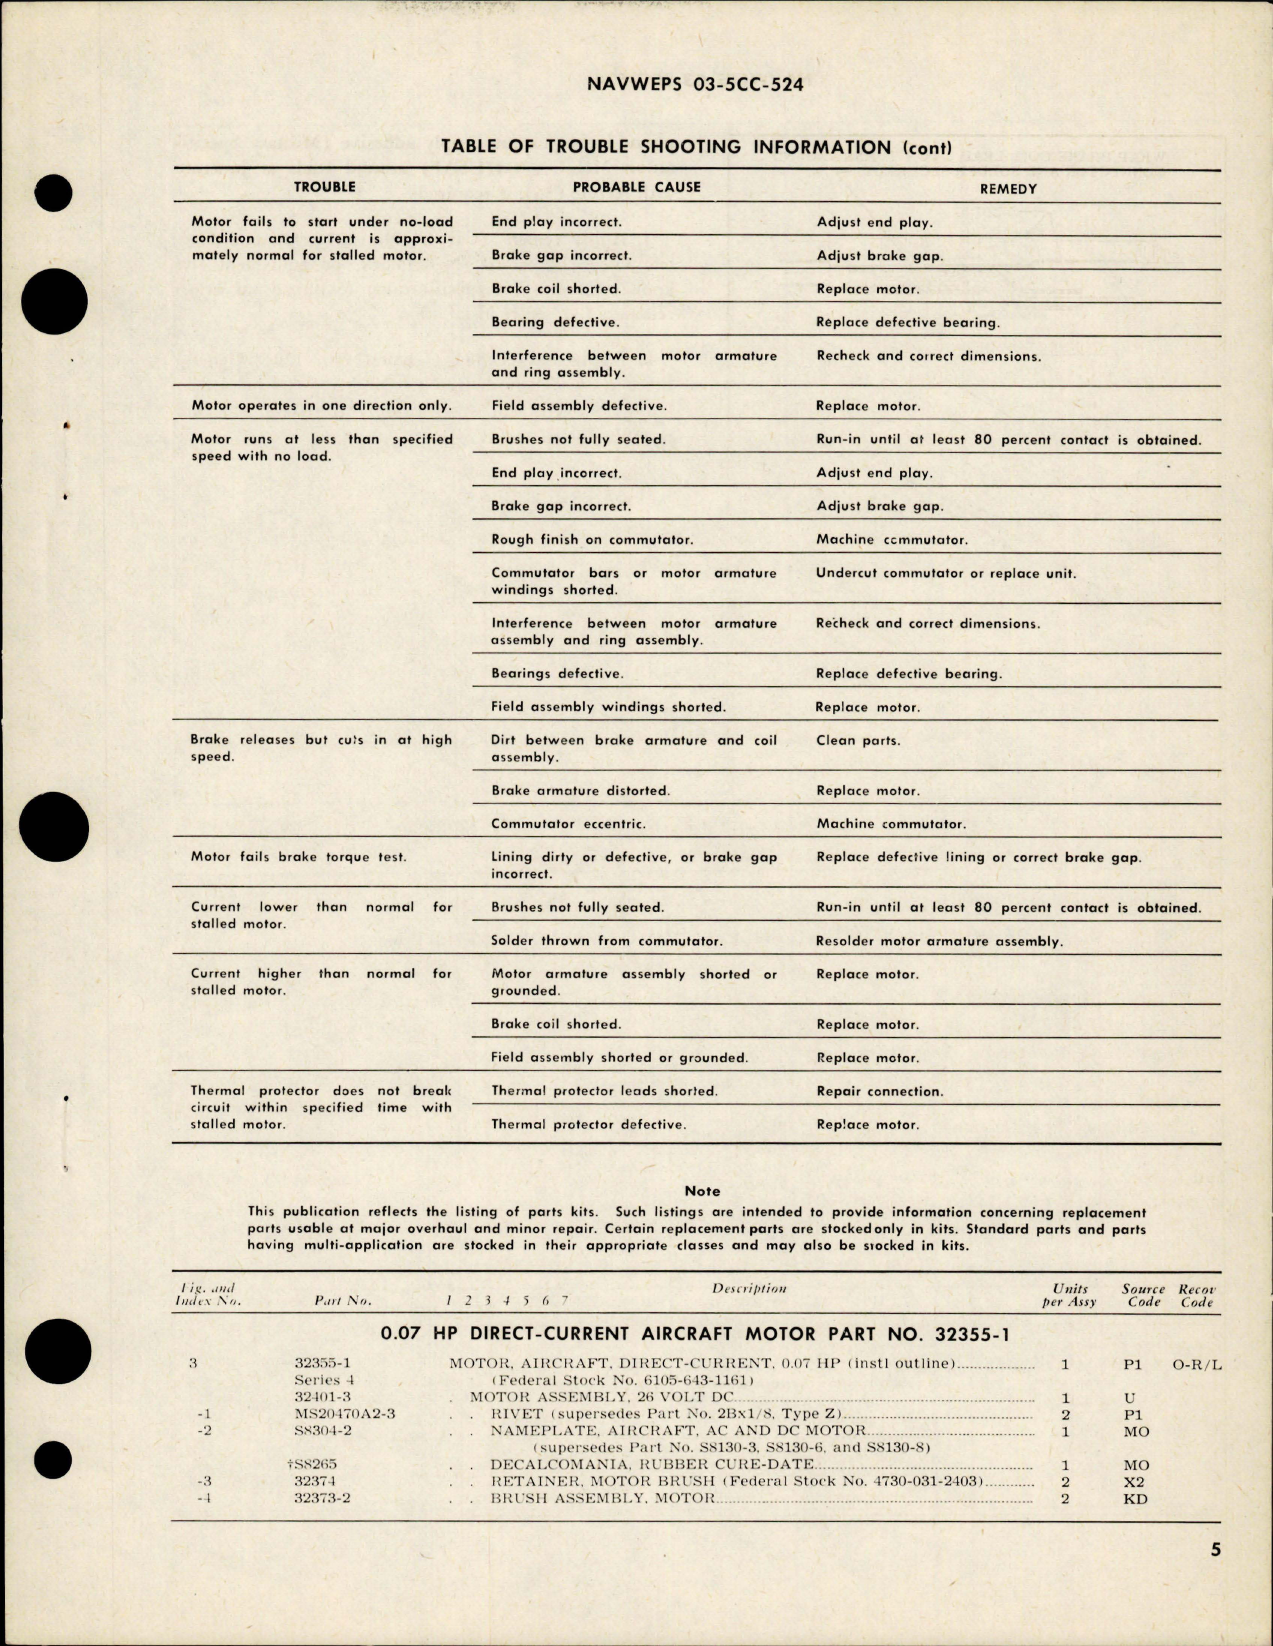 Sample page 5 from AirCorps Library document: Overhaul Instructions with Parts Breakdown for  Direct Current Aircraft Motor - 0.07 HP - Part 32355-1 